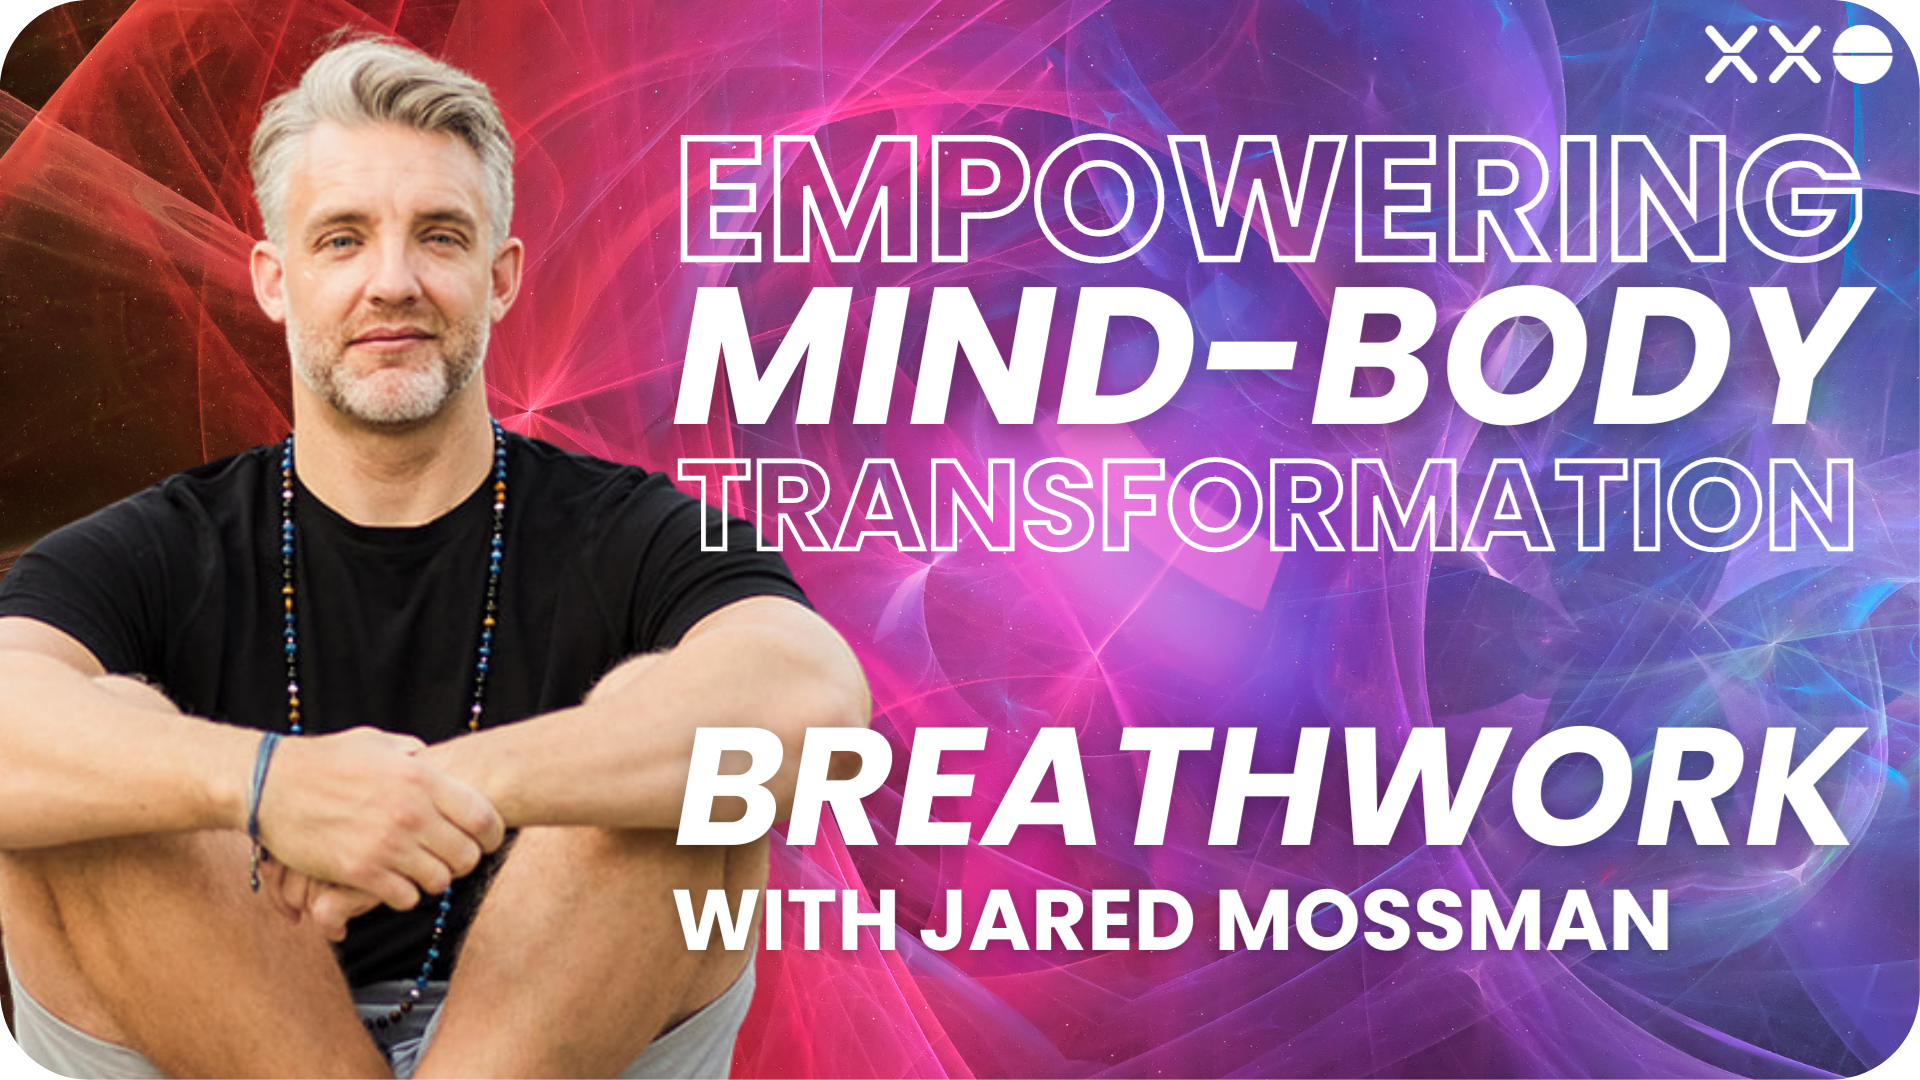 JARED MOSSMAN AT XXO CONNECT EMPOWERING MIND BODY TRANSFORMATION BREATHWORK.png